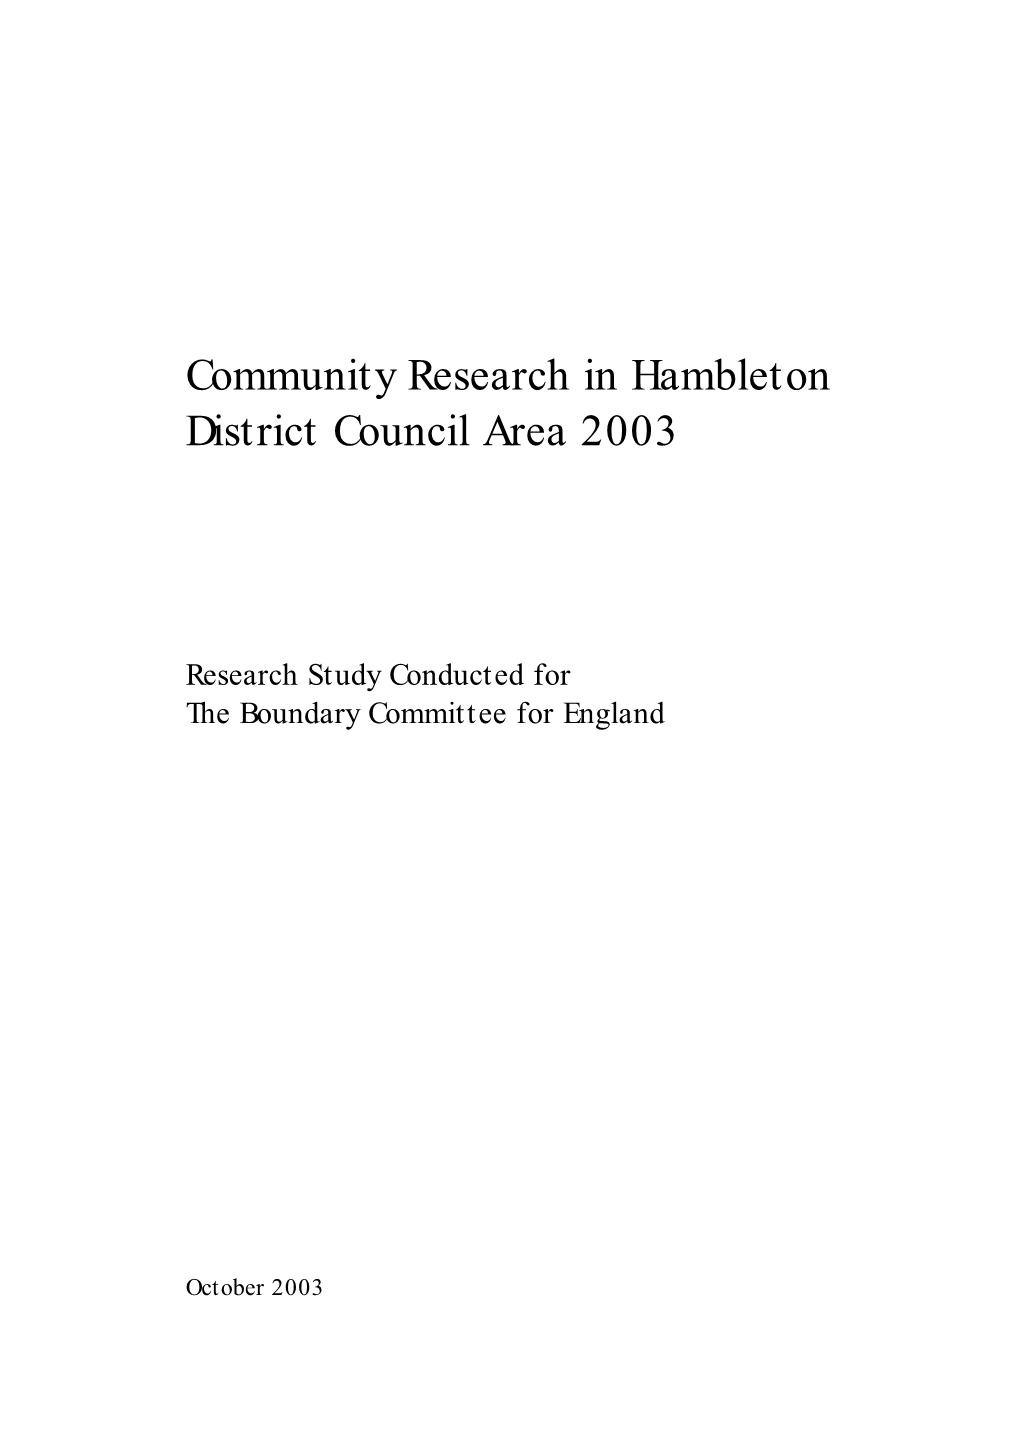 Community Research in Hambleton District Council Area 2003